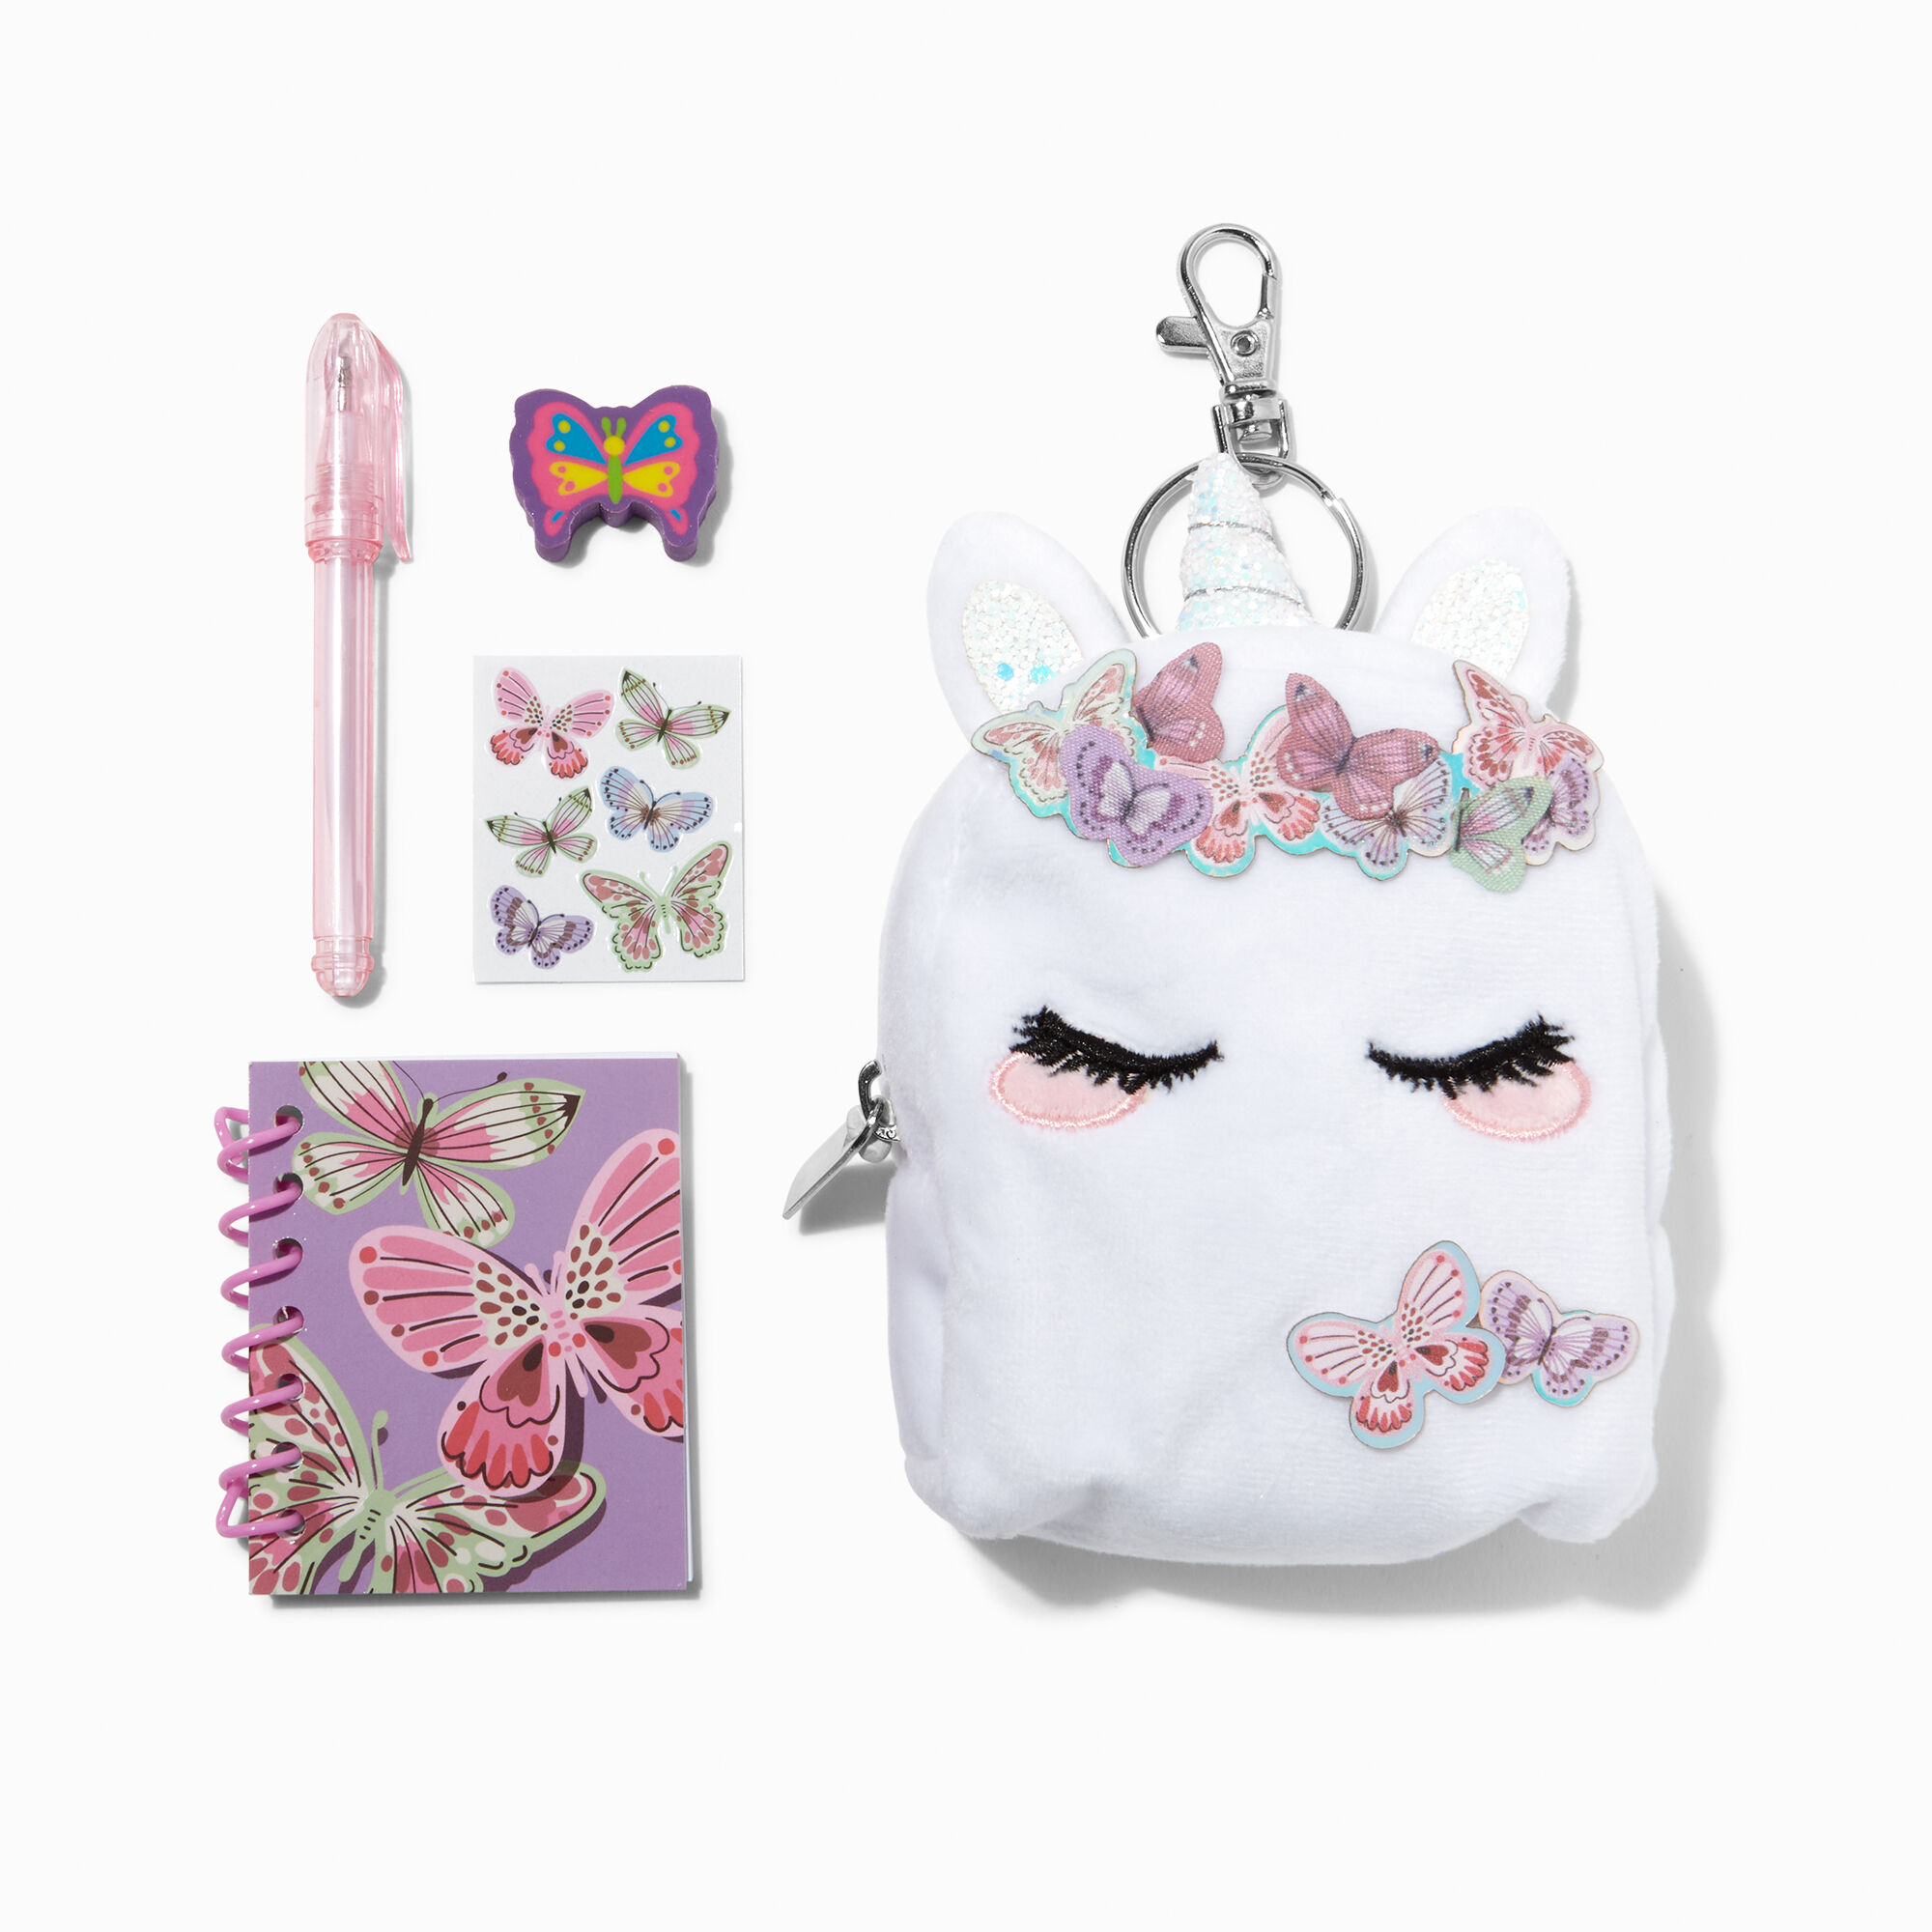 View Claires Butterfly Unicorn 4 Backpack Stationery Set information